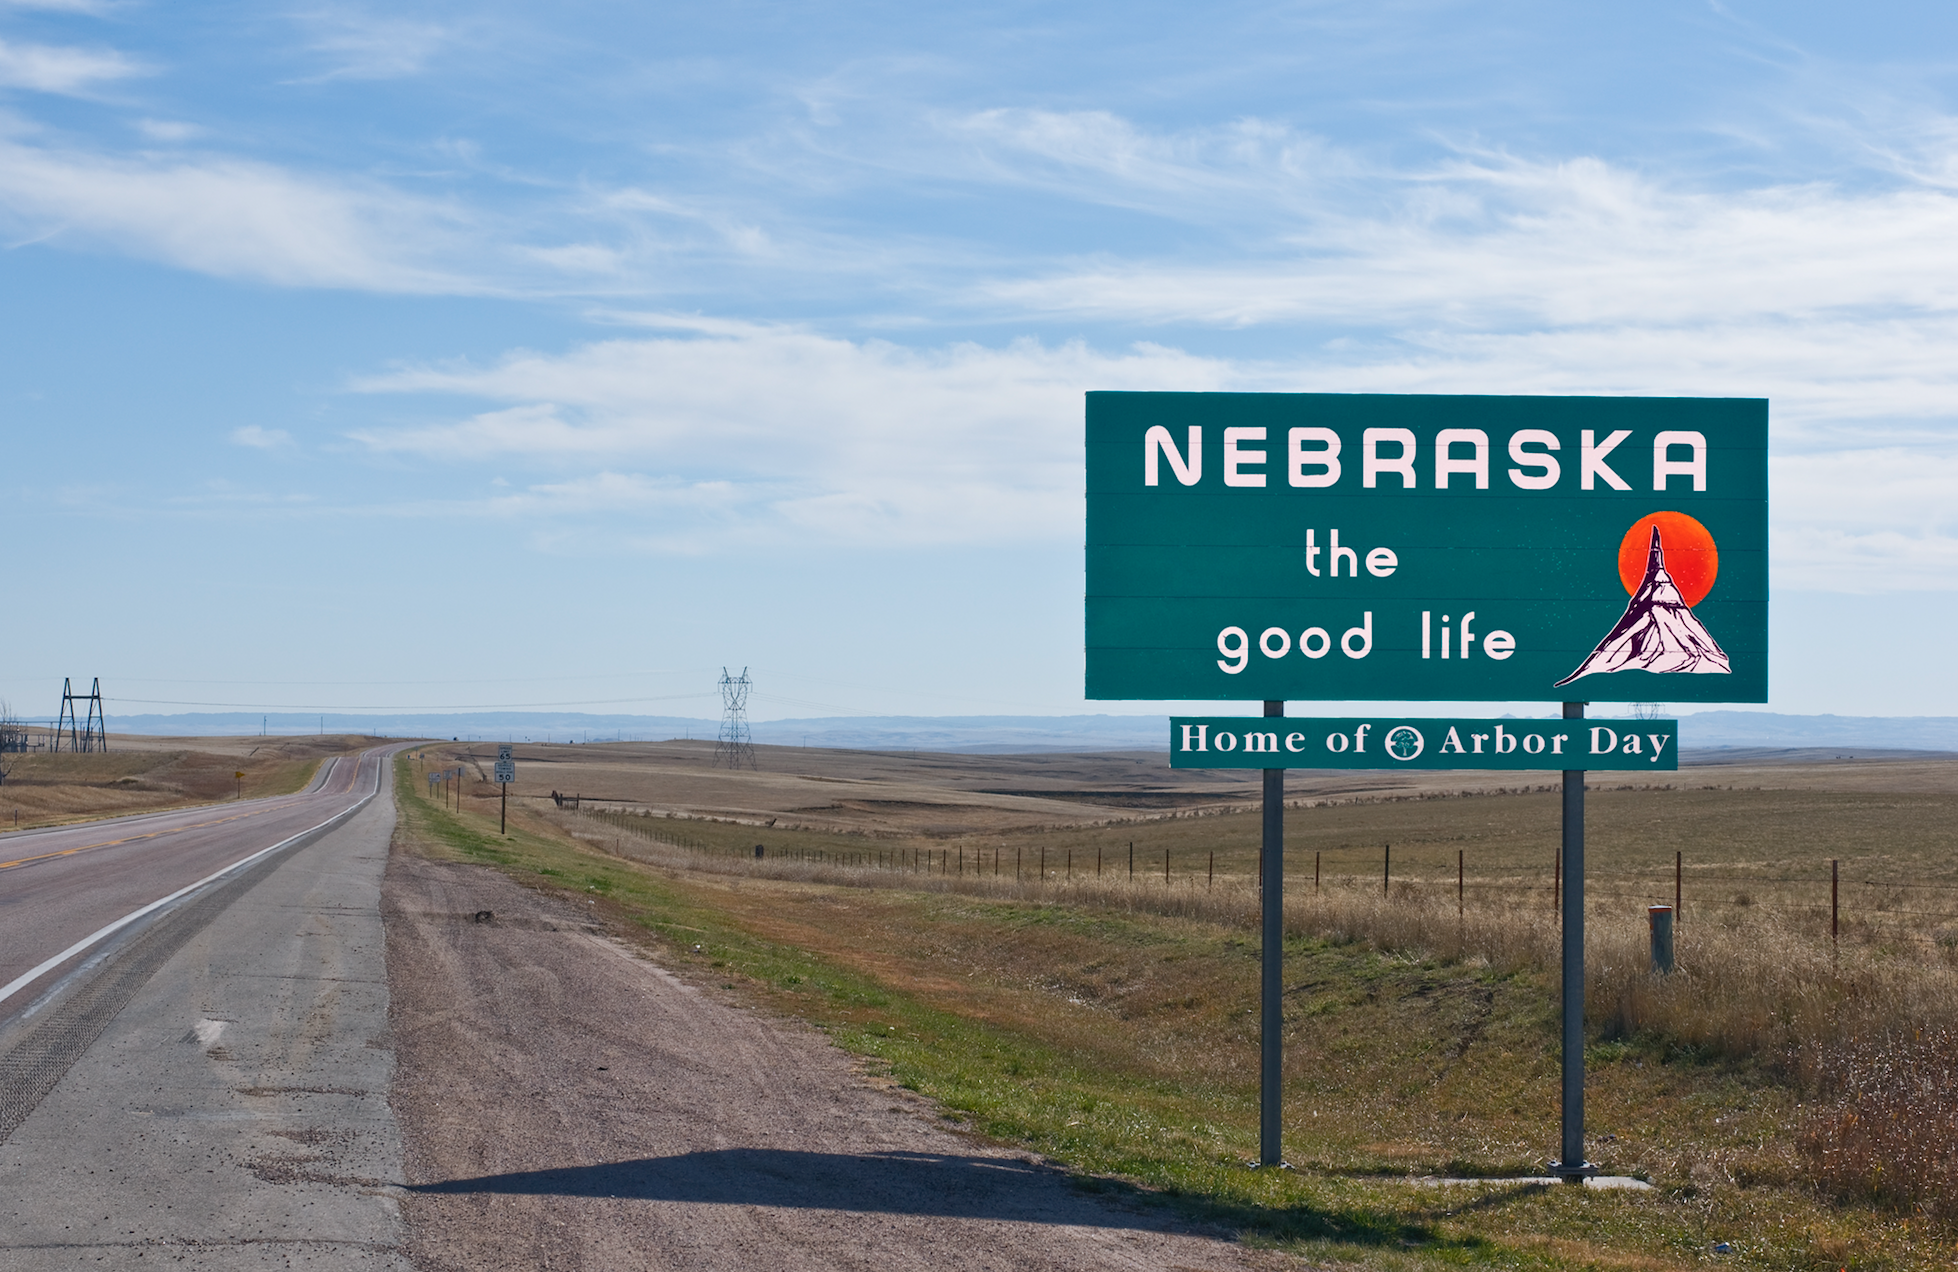 A picture of the Nebraska state sign by the side of a rural road